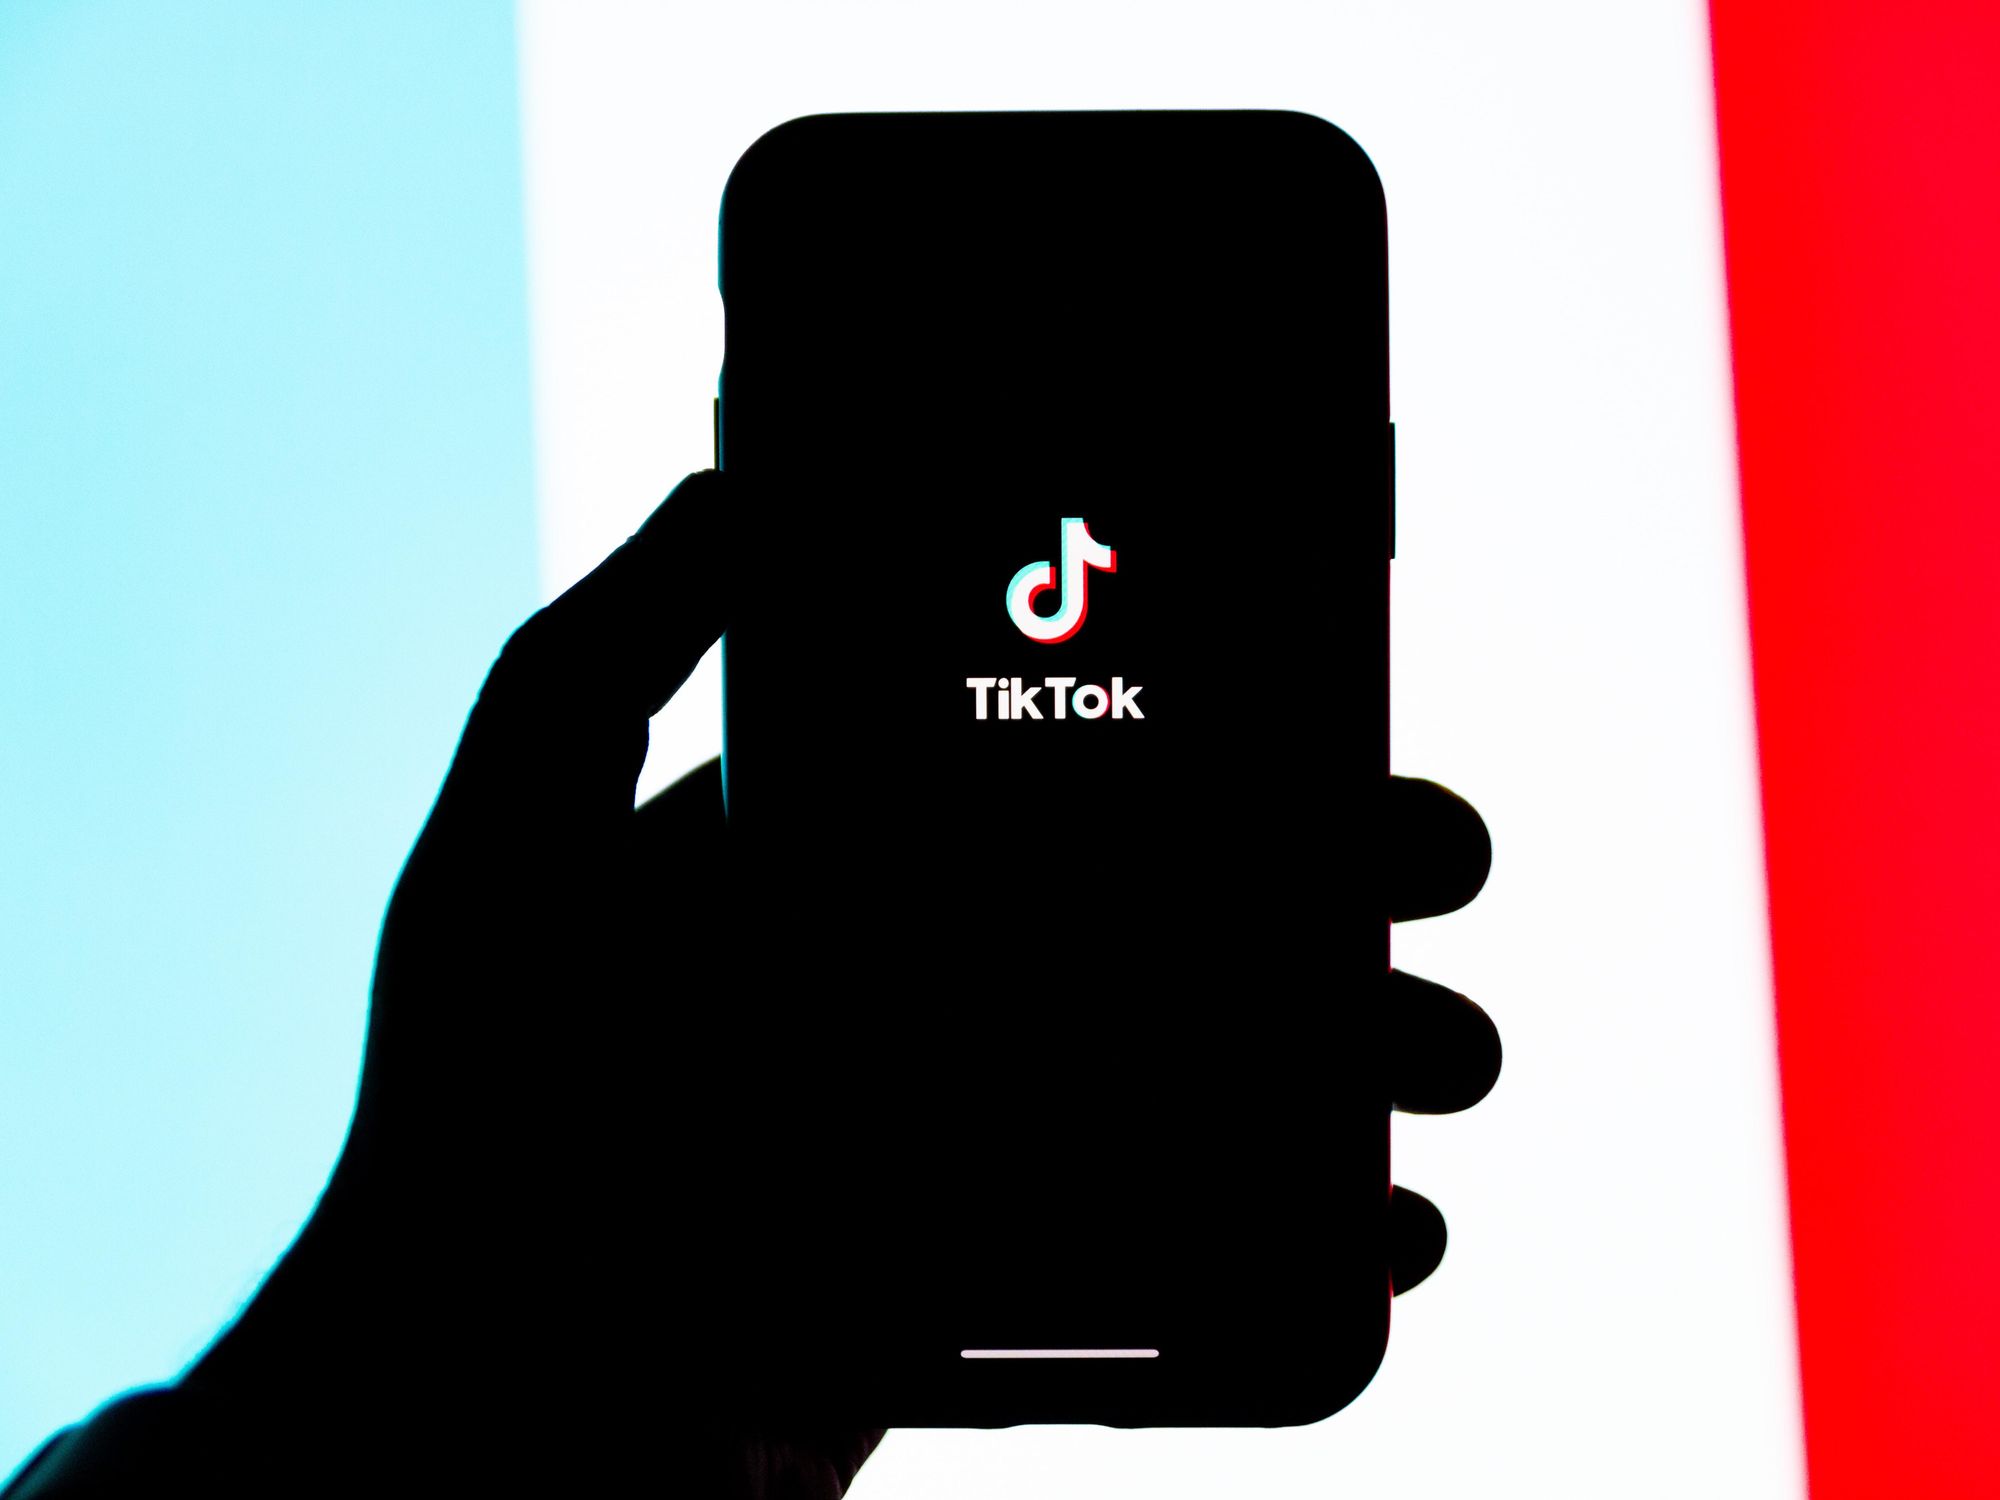 TikTok Is the #1 Downloaded App in the World